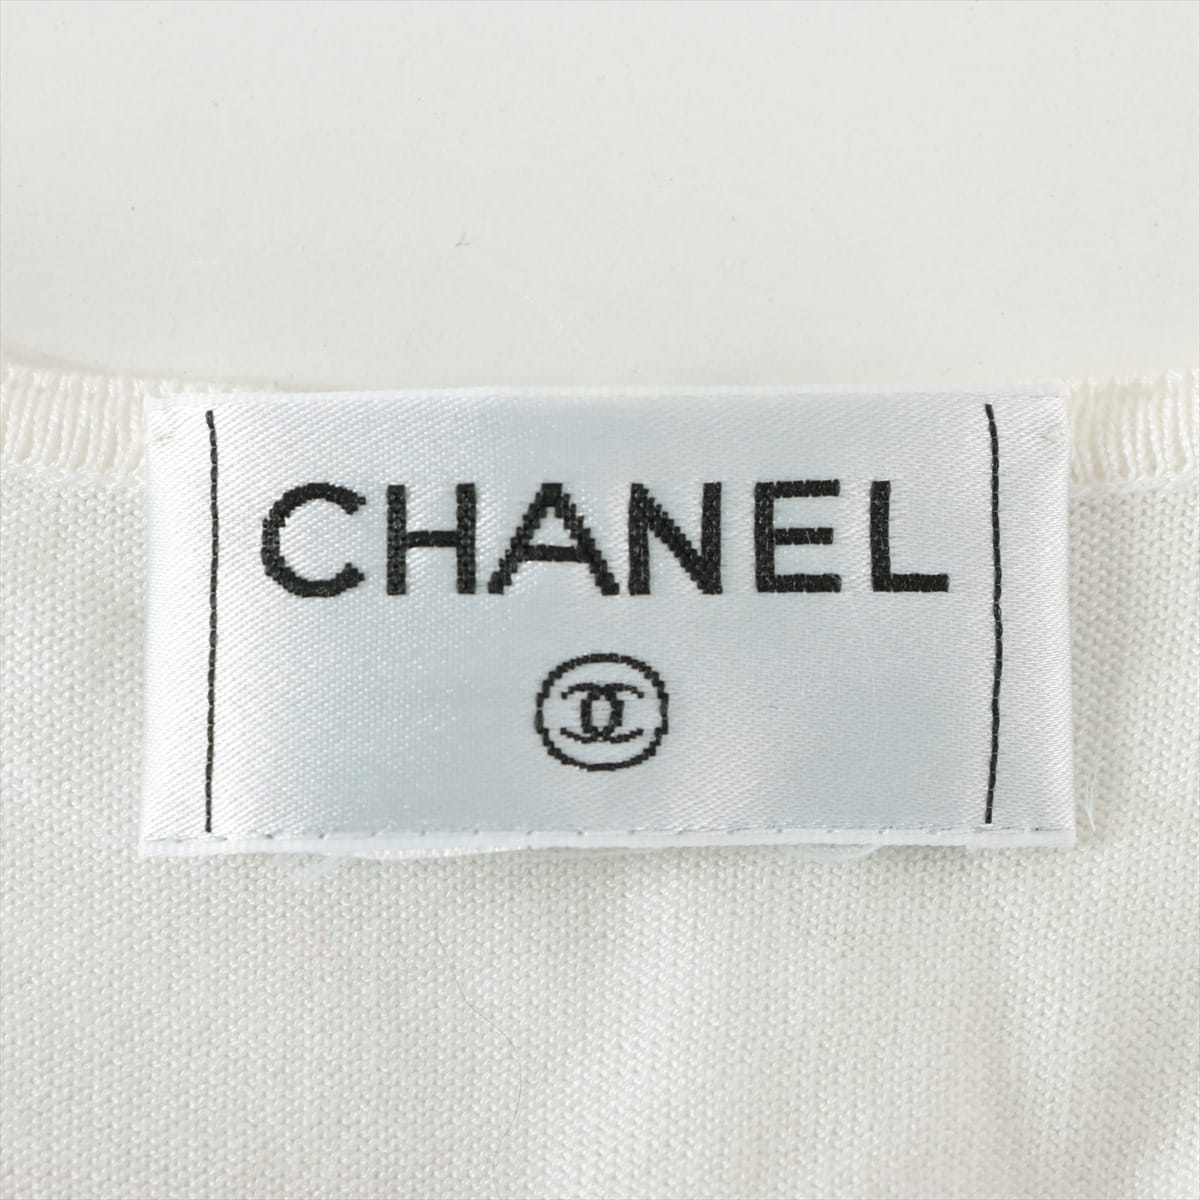 Chanel Coco Mark Cotton T-shirt 38 Ladies' White  Sleeveless The model year tag is cut